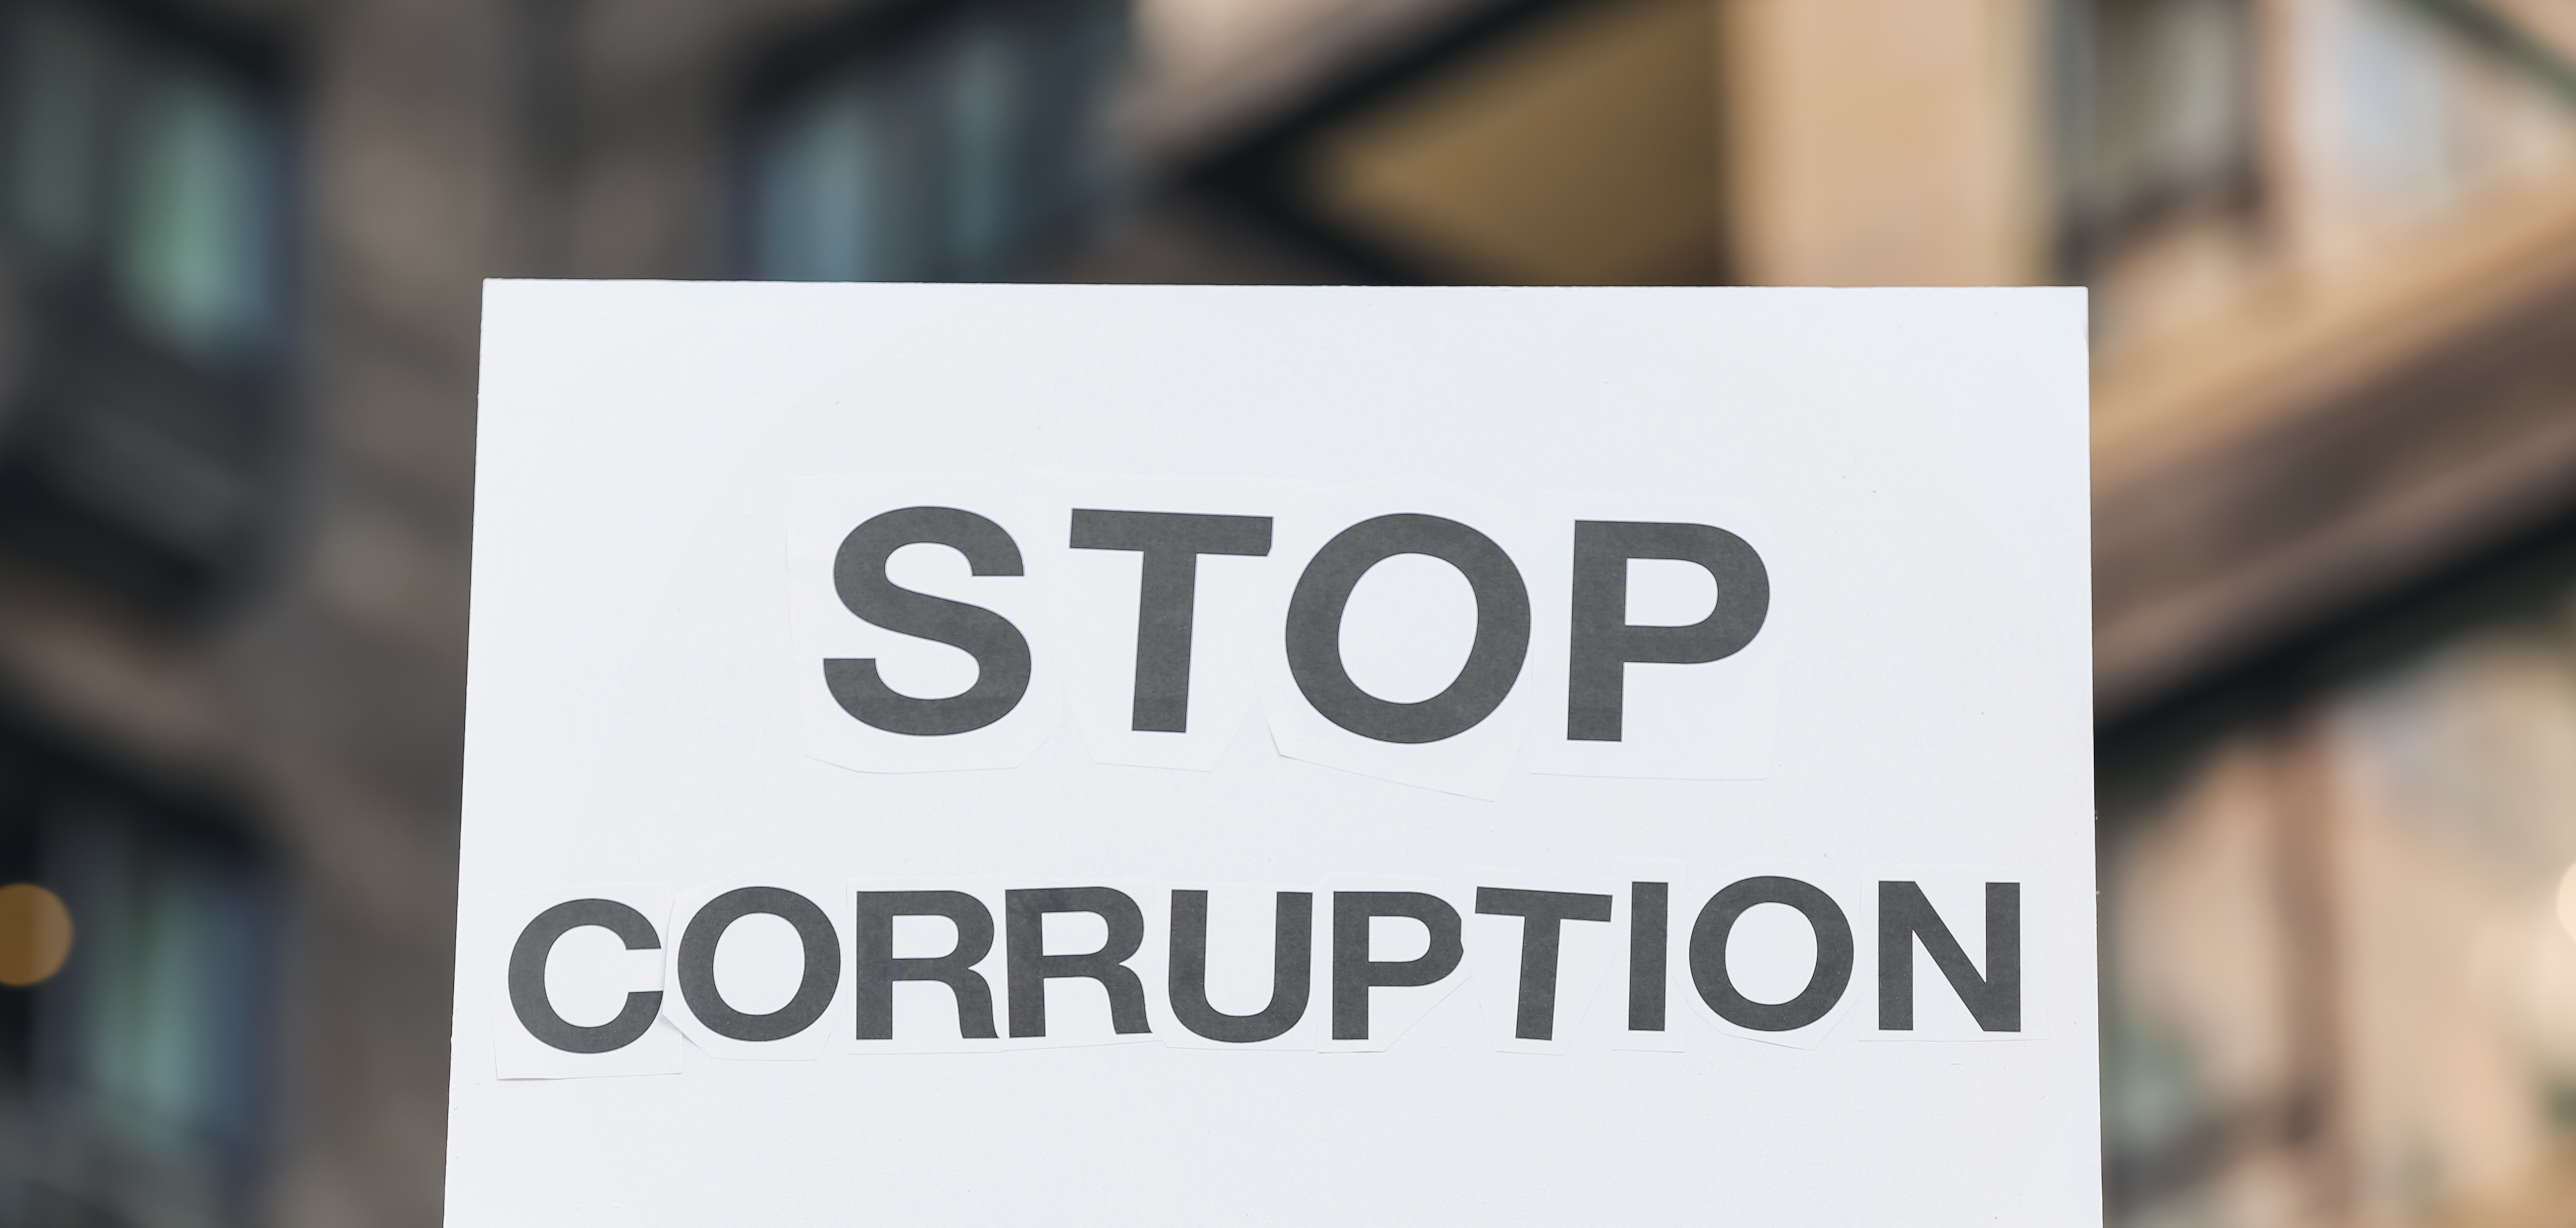 Analytical report on anti-corruption to be presented in London